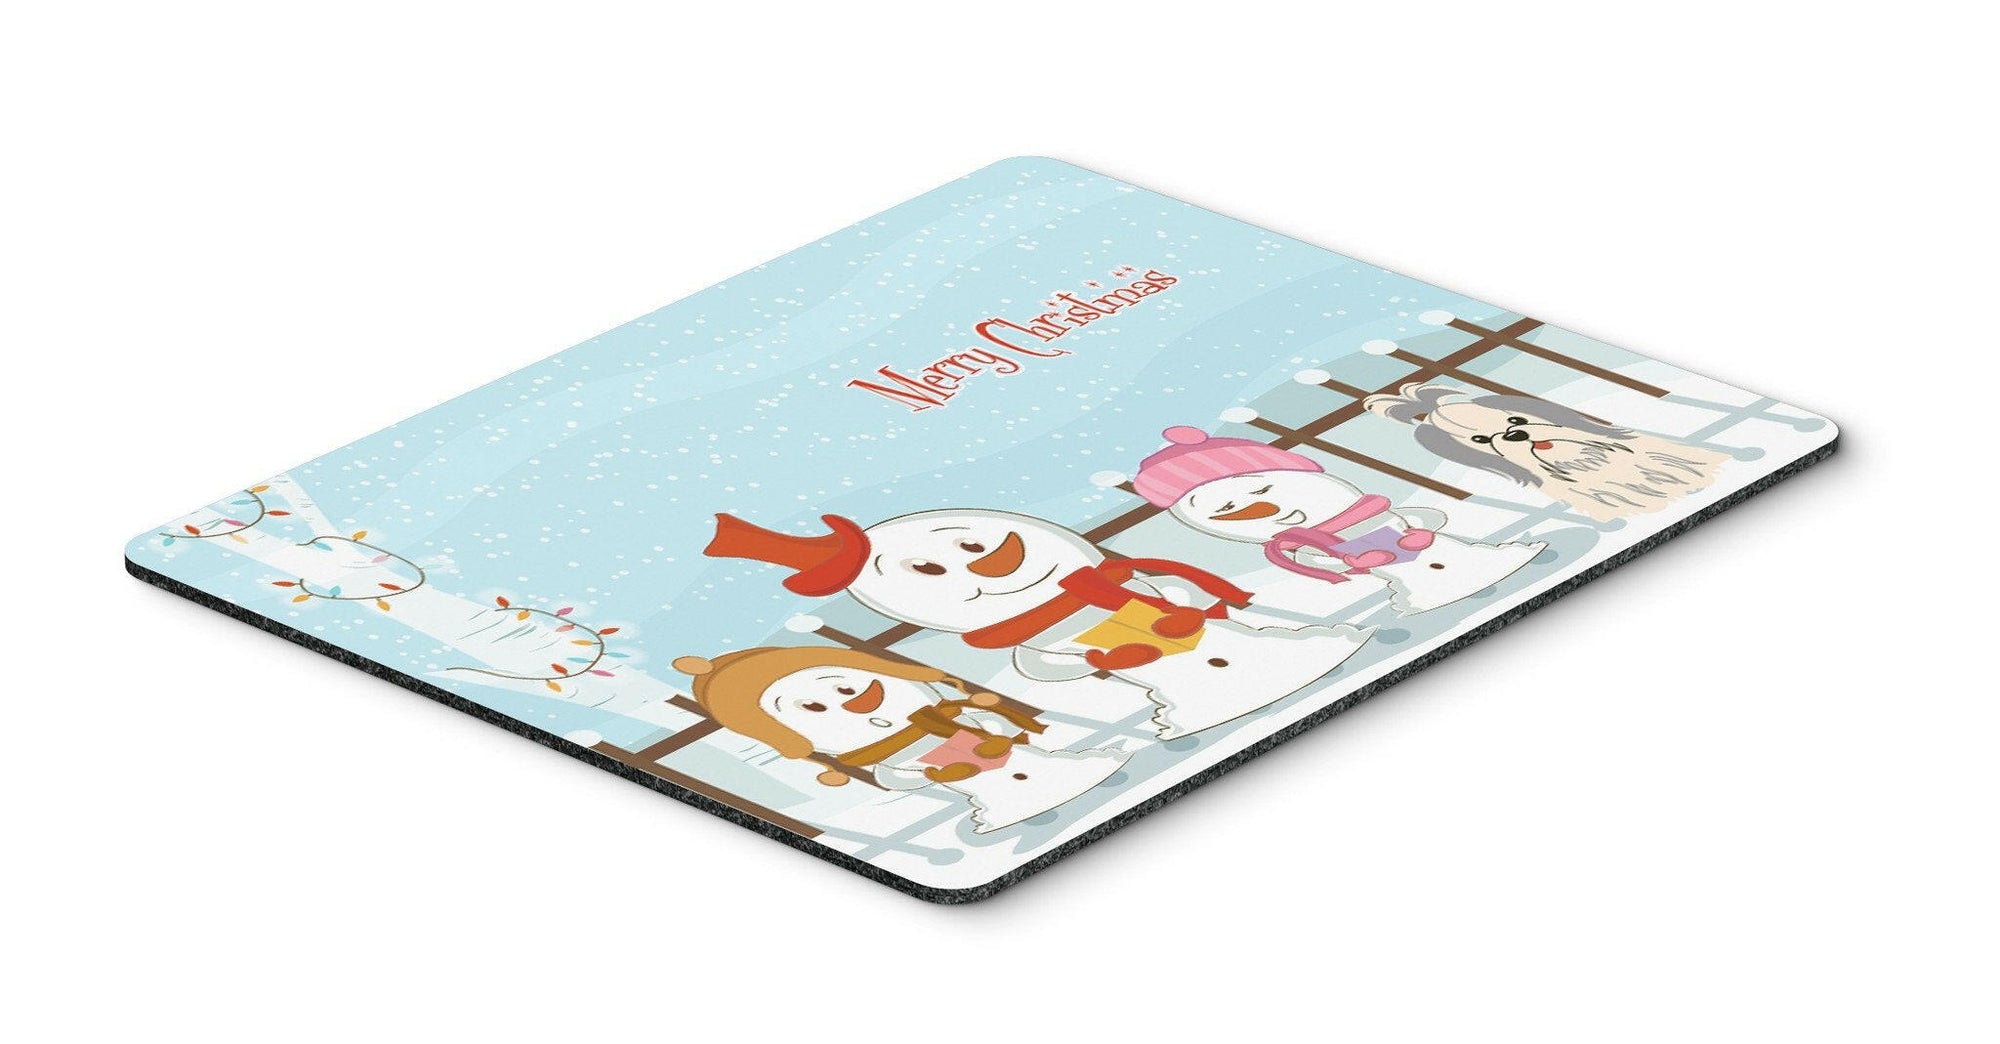 Merry Christmas Carolers Shih Tzu Silver White Mouse Pad, Hot Pad or Trivet BB2416MP by Caroline's Treasures